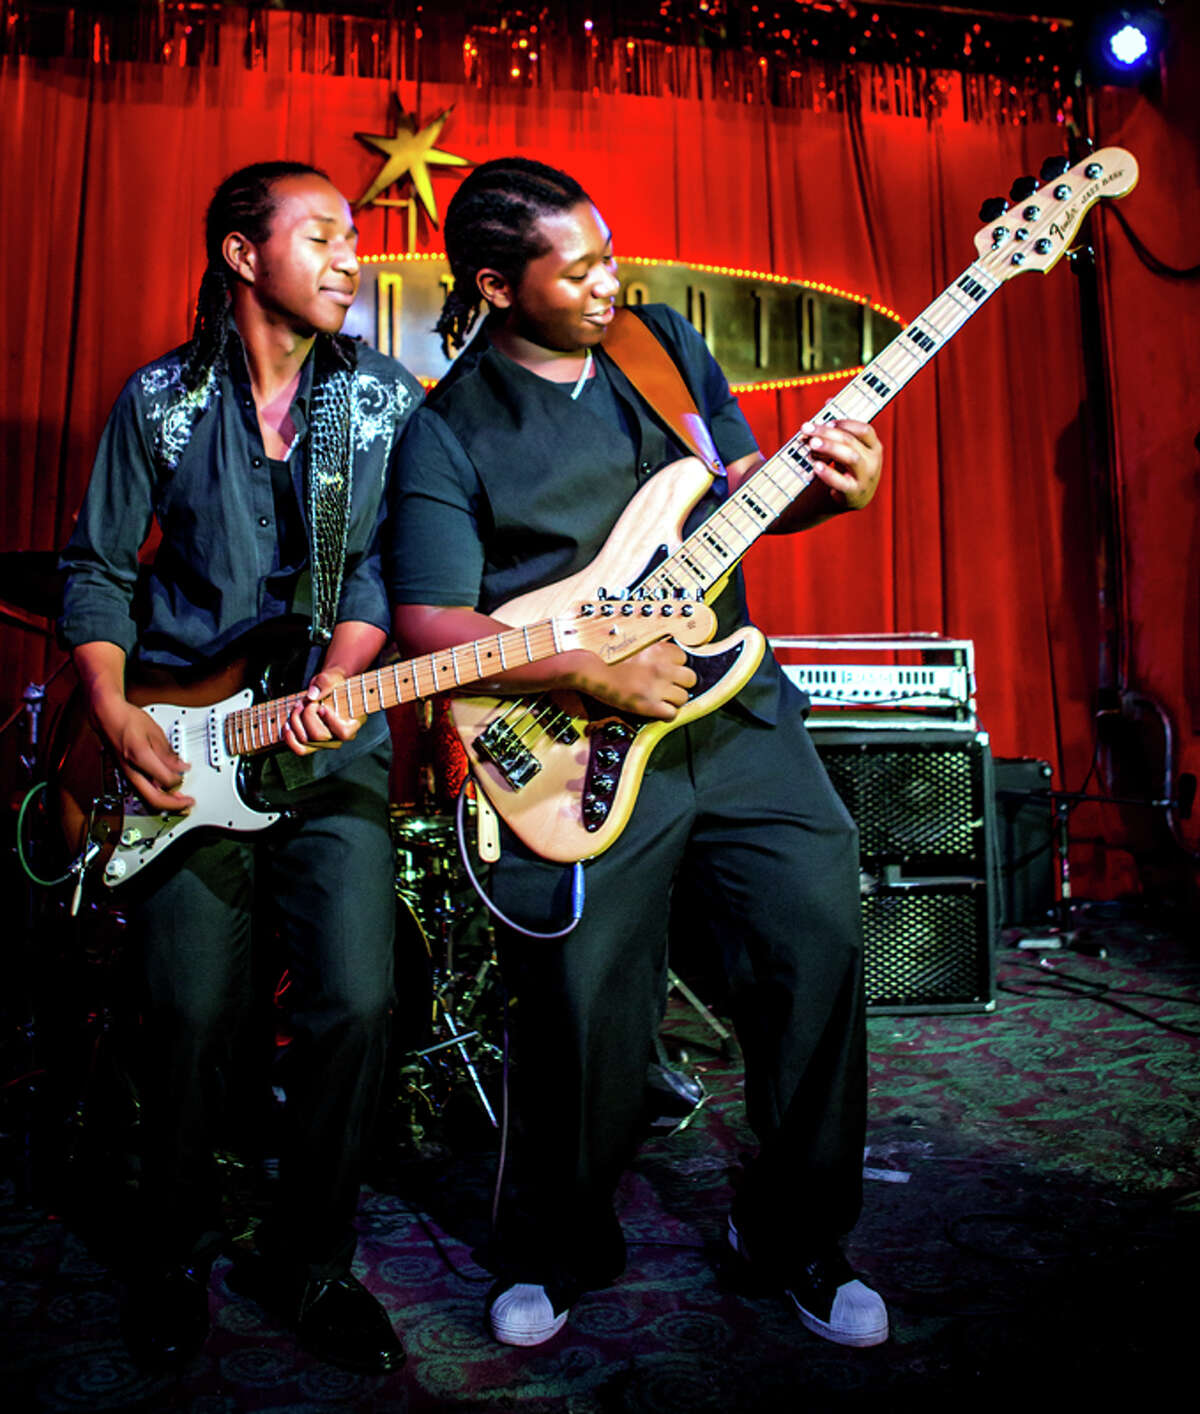 Brothers Glenn (guitar) and Alex (bass) Peterson have a standing gig on Monday nights at Austin’s Continental Club. It’s worth the drive – the youthful energy and laid-black virtuosity they bring to the blues is infectious, closer in spirit to early Robert Cray than a Sixth Street guitar shredder. You can save your gas money, though, because the Peterson Brothers are coming to town to showcase the music that earned them a Living Blues Critics Award for their 2015 debut album. With Tomar and the FCs. 9 p.m. Friday. Sam’s Burger Joint, 330 E. Grayson St. $12 (booths sold out). samsburgerjoint.com -- Jim Kiest